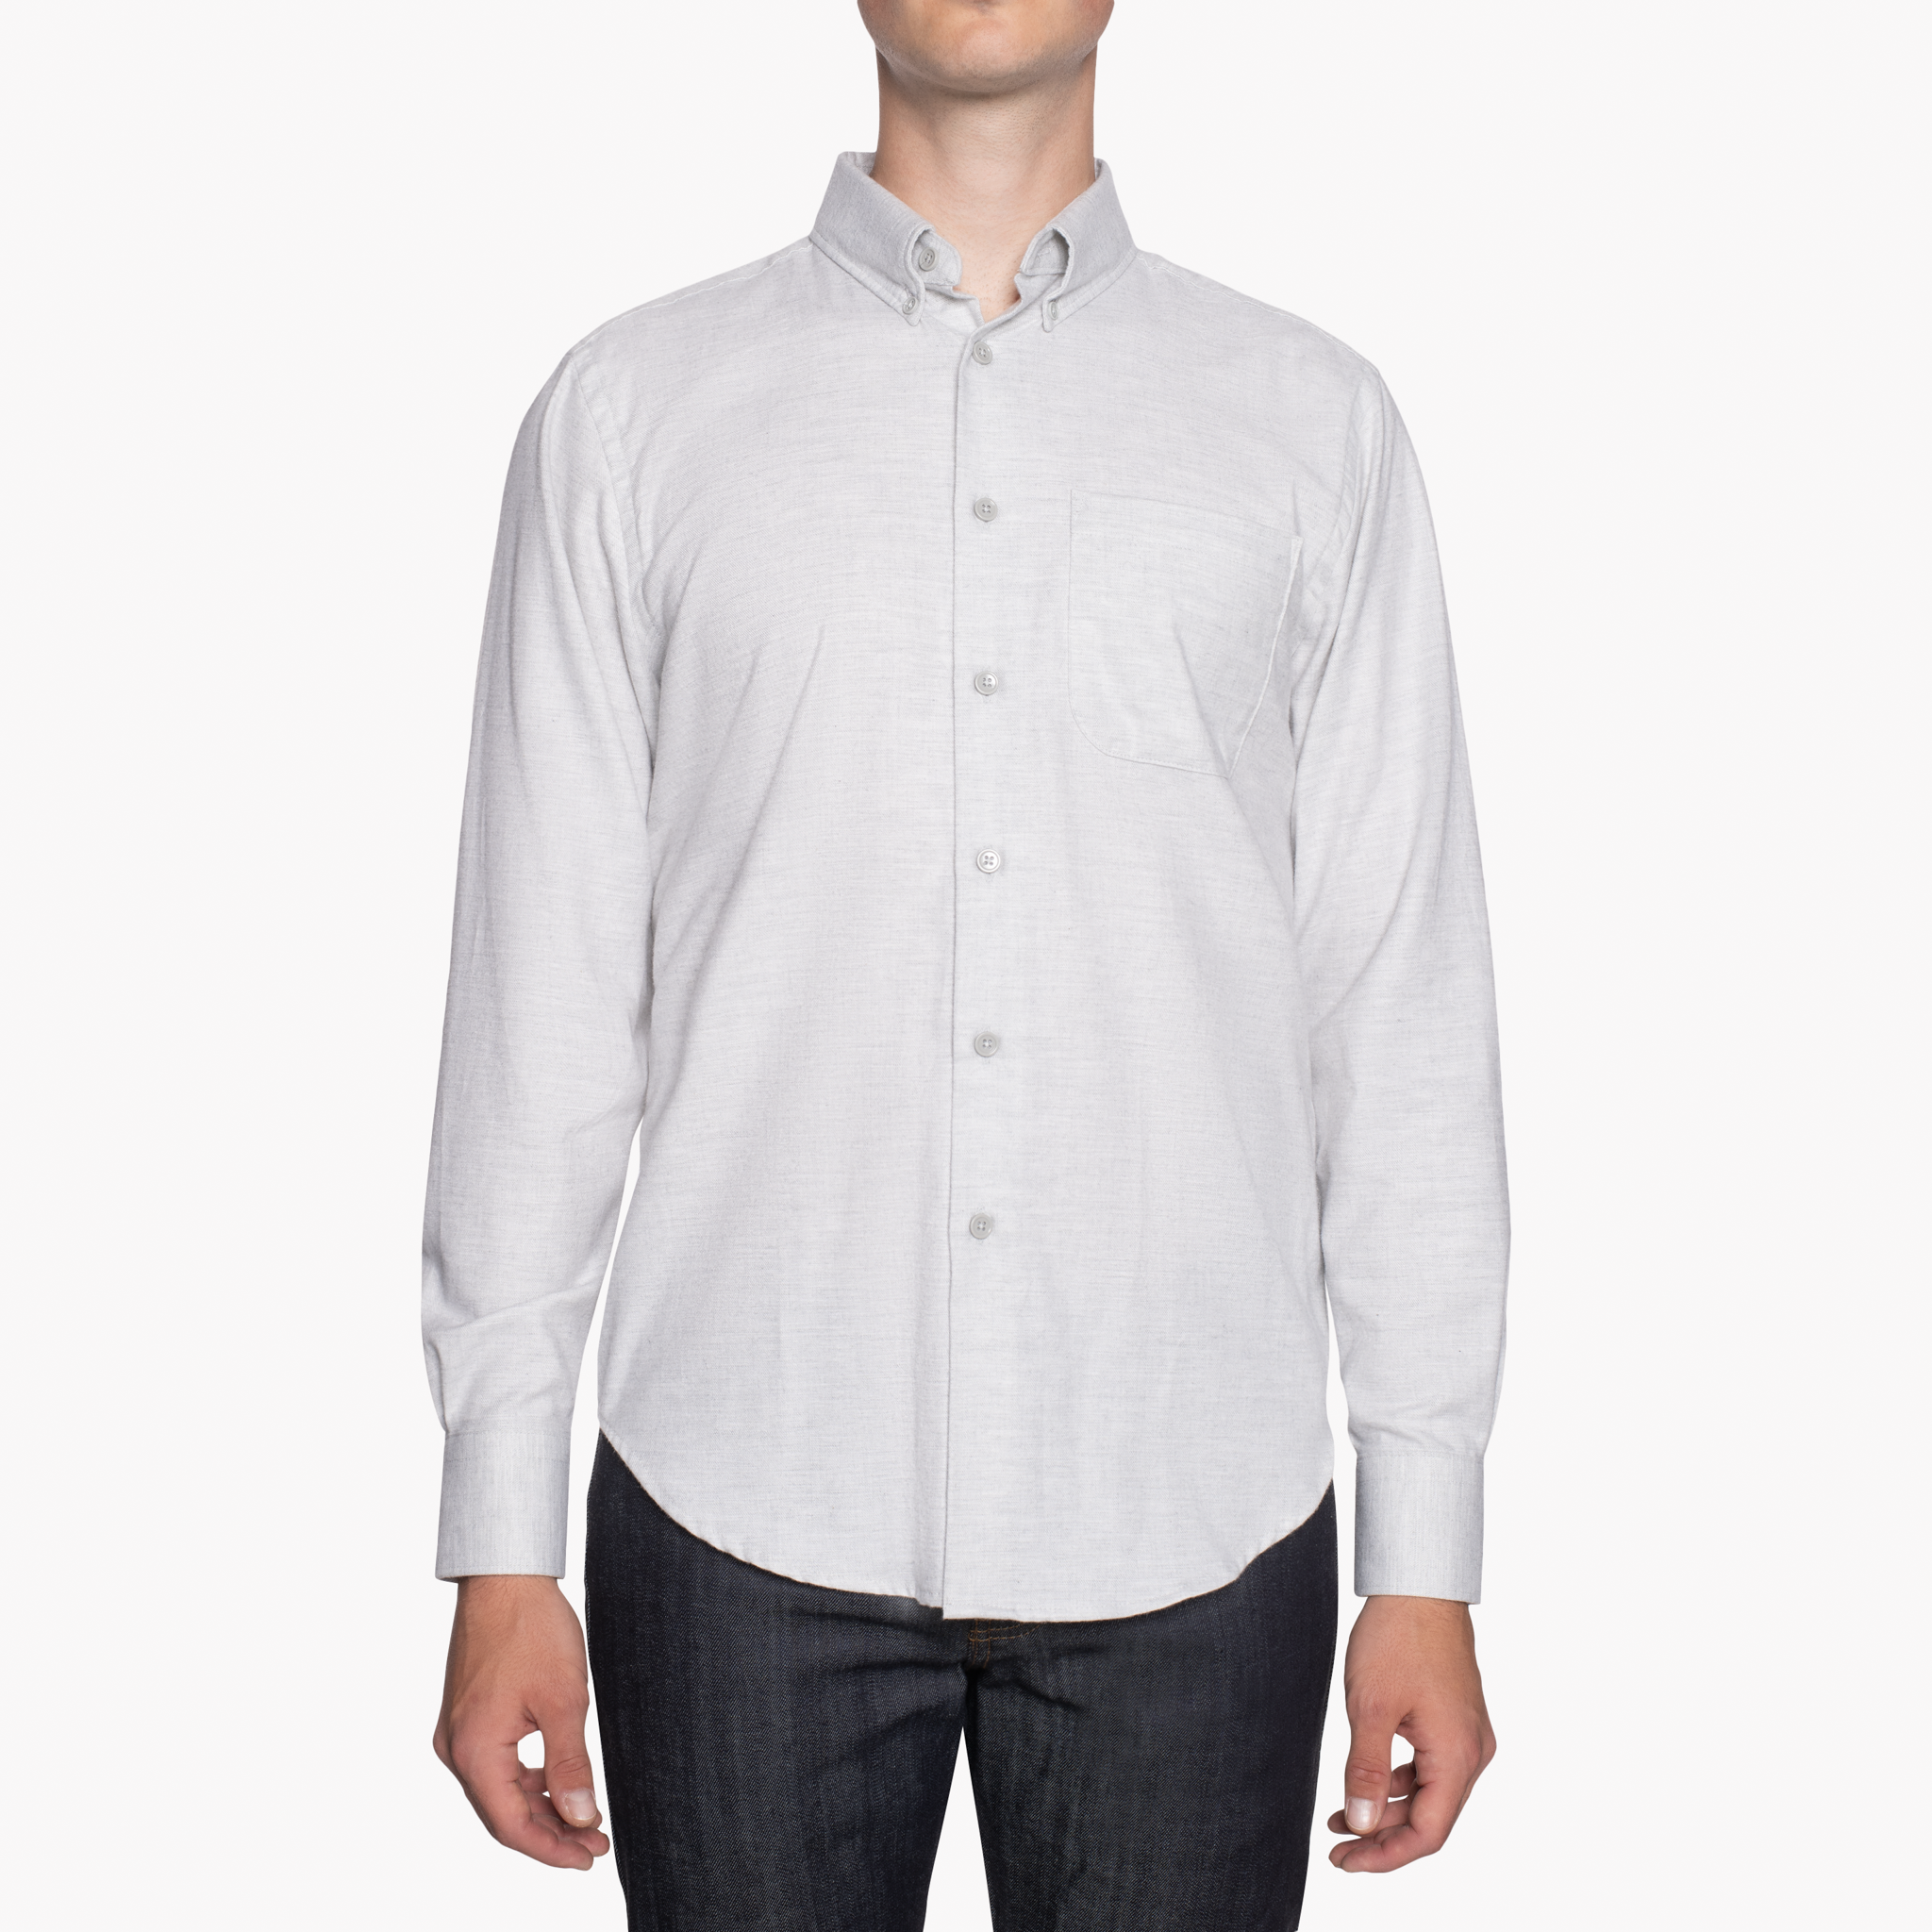  Easy Shirt - Soft Twill - Grey -  front 